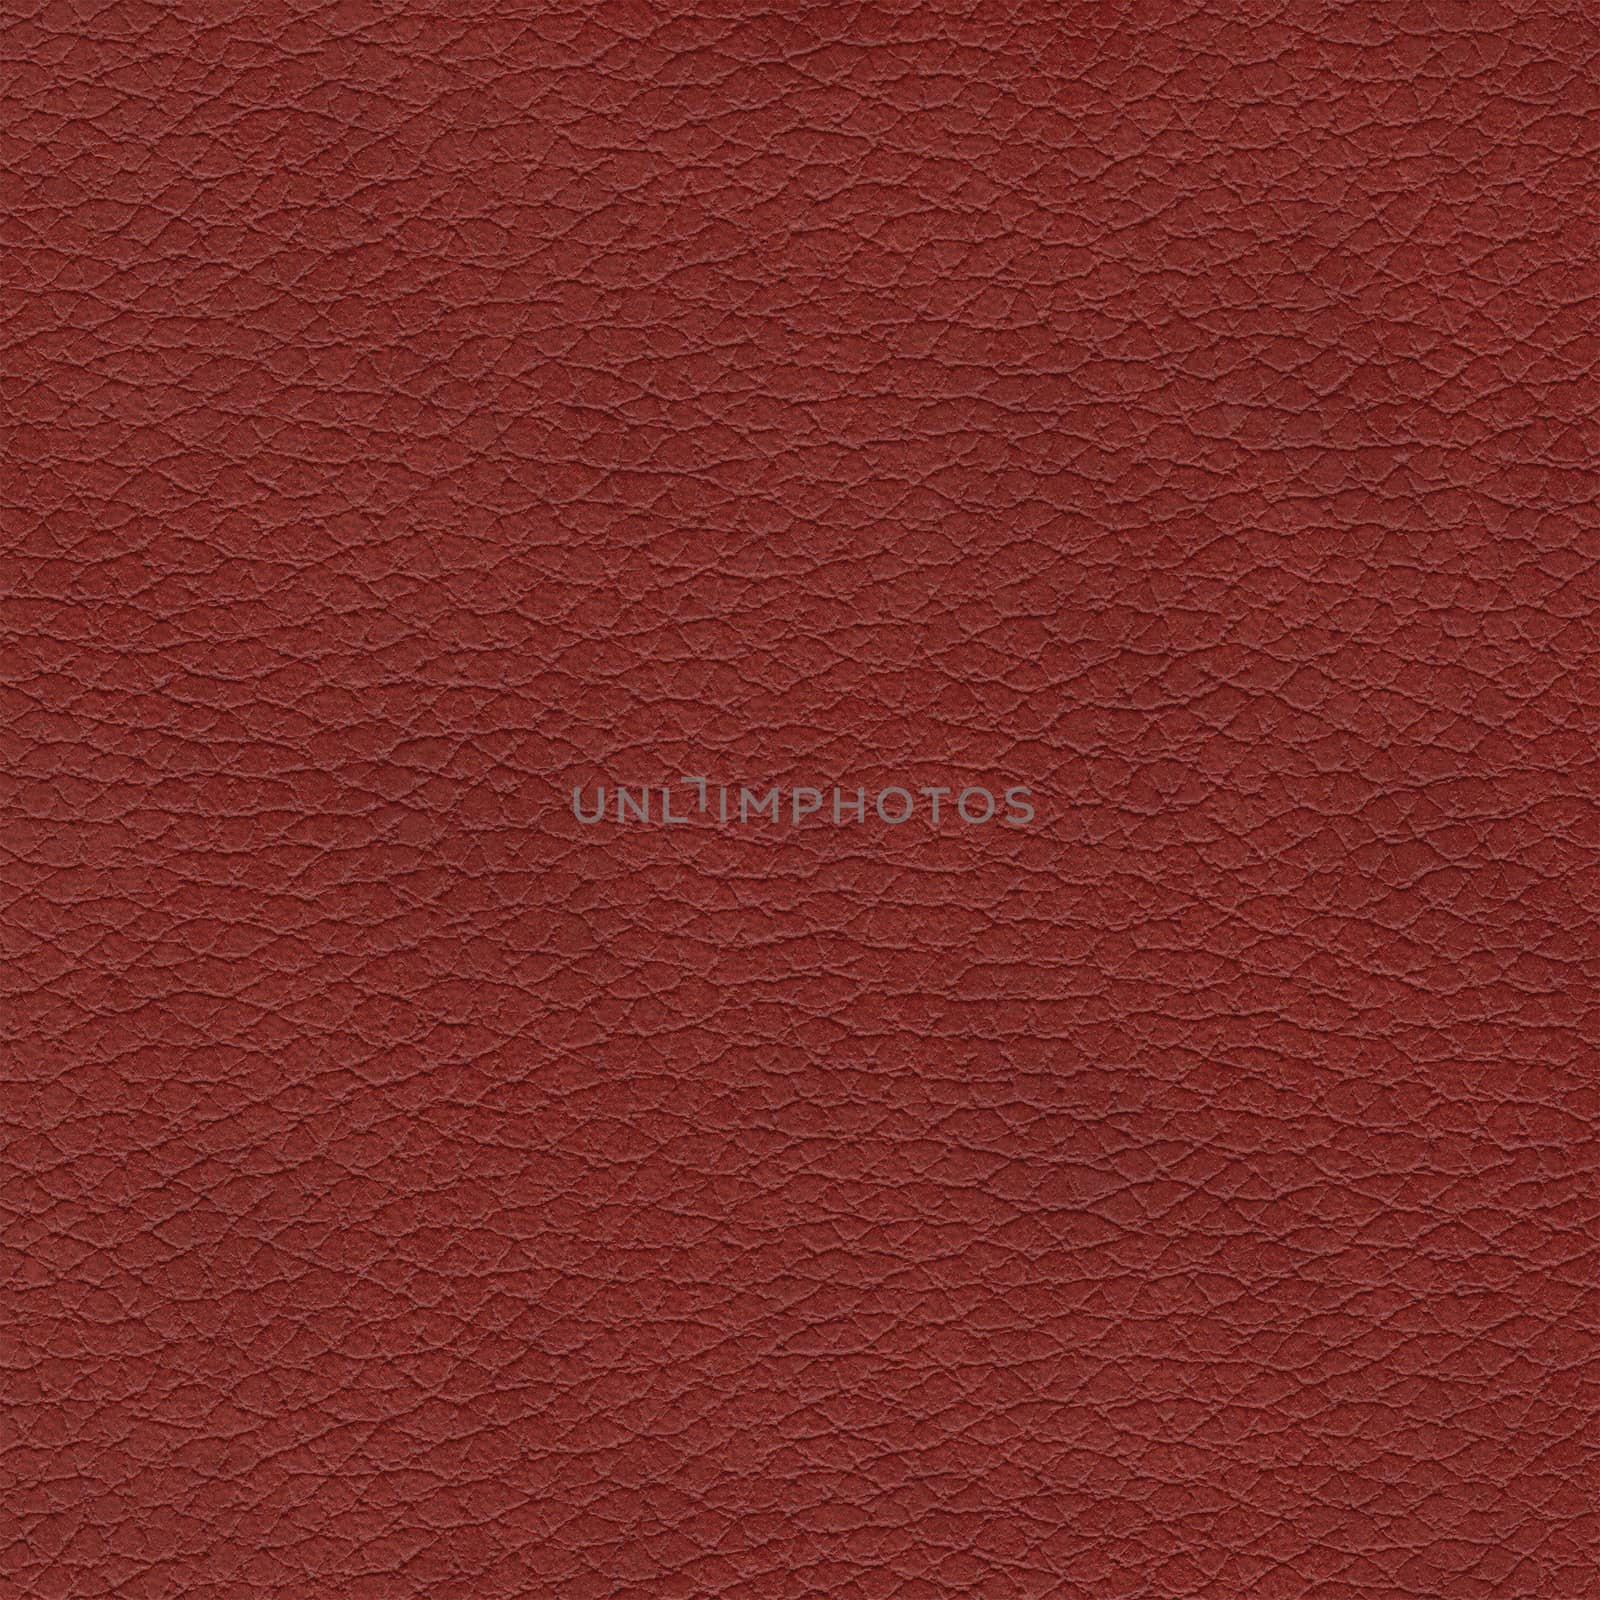 Old synthetic leather texture, dark red color